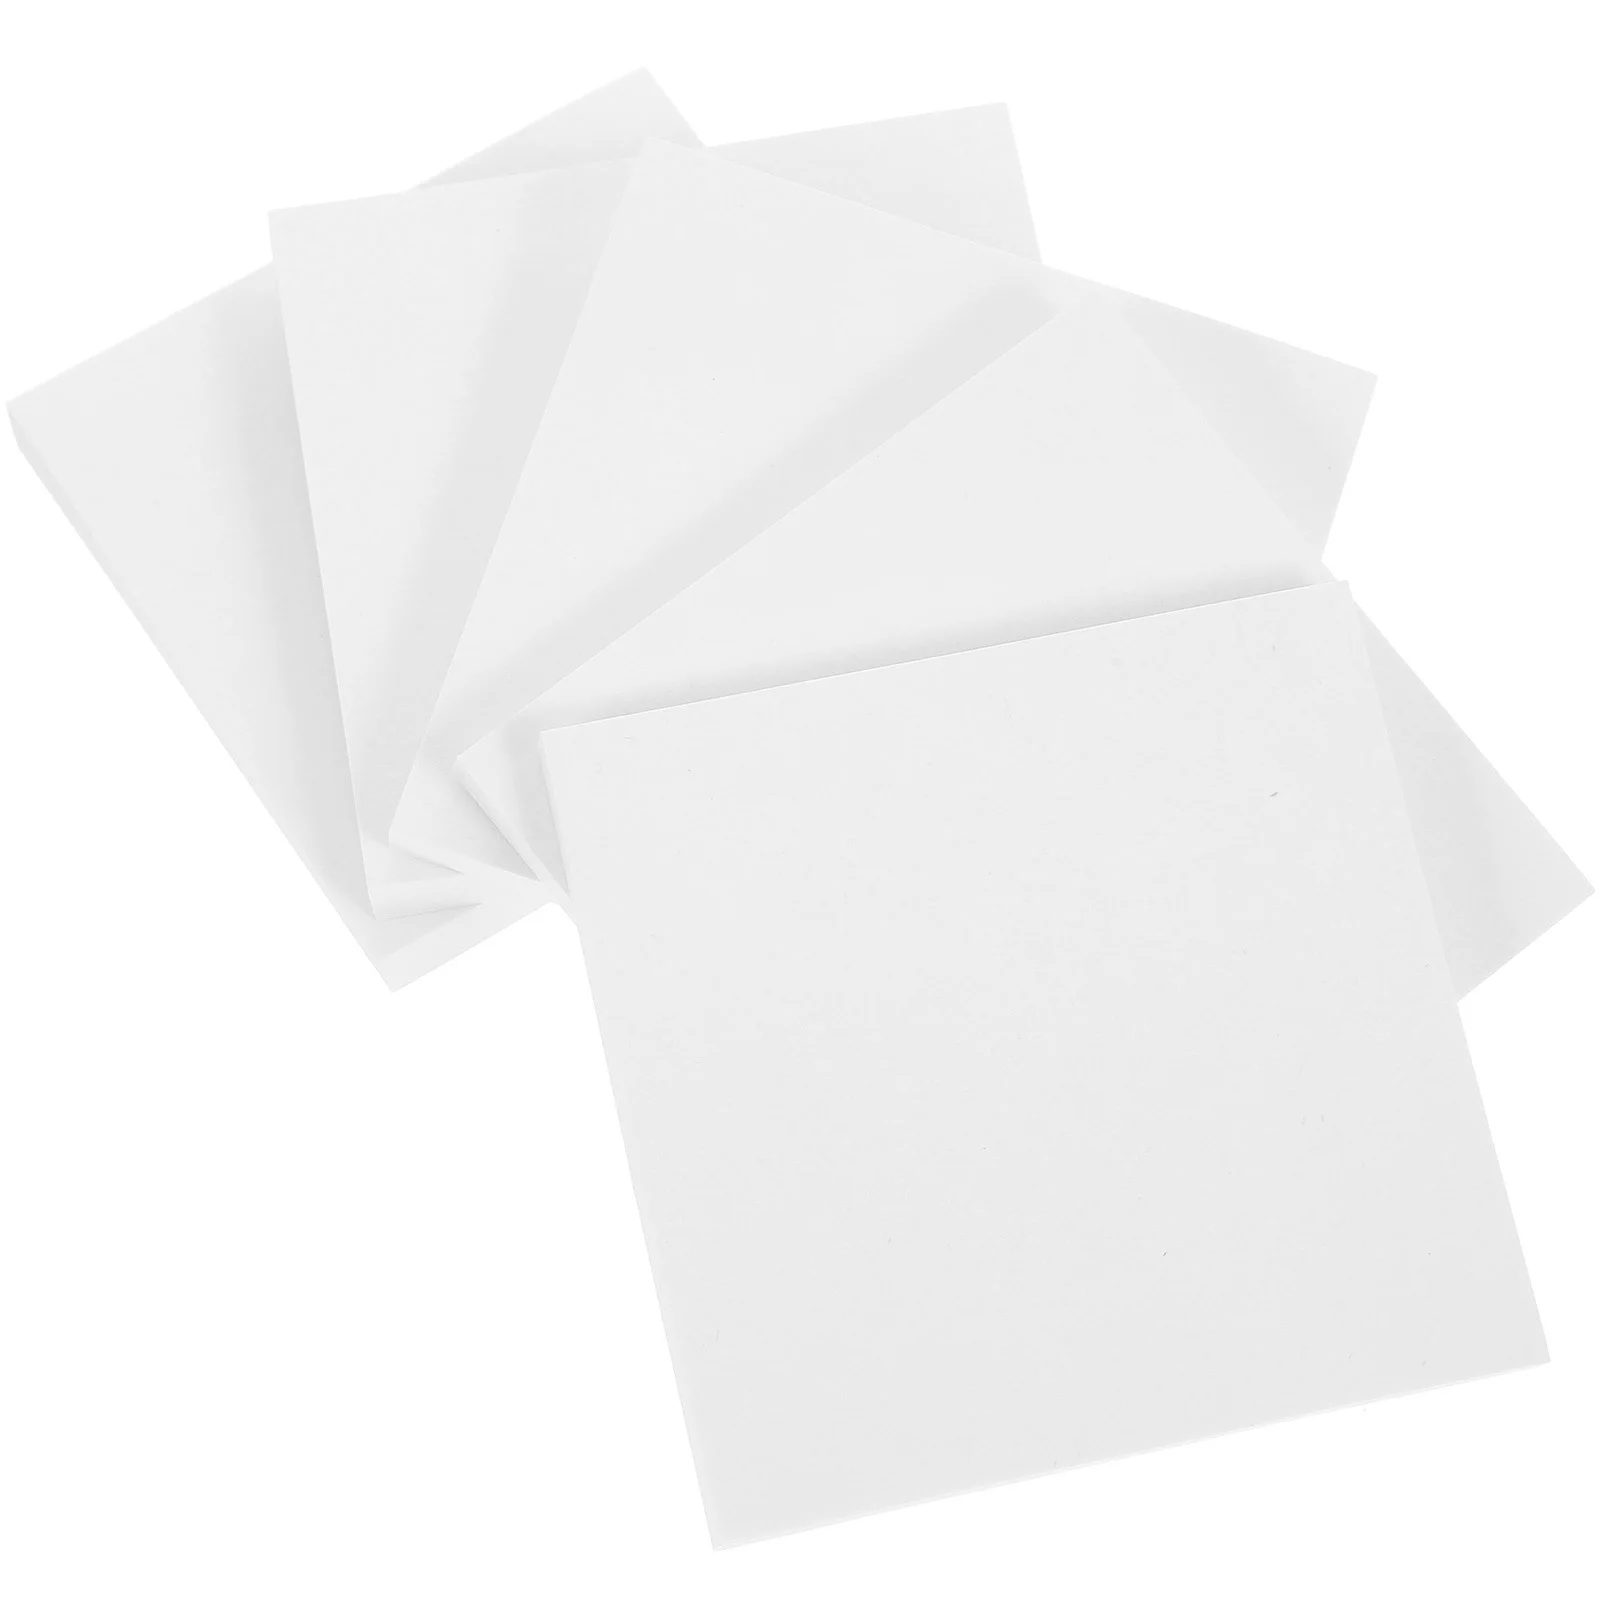 

5 Books Memo Notepads Tear-off Note Pads Adhesive Notepads Small Sticky Tabs Note Taking Notepads